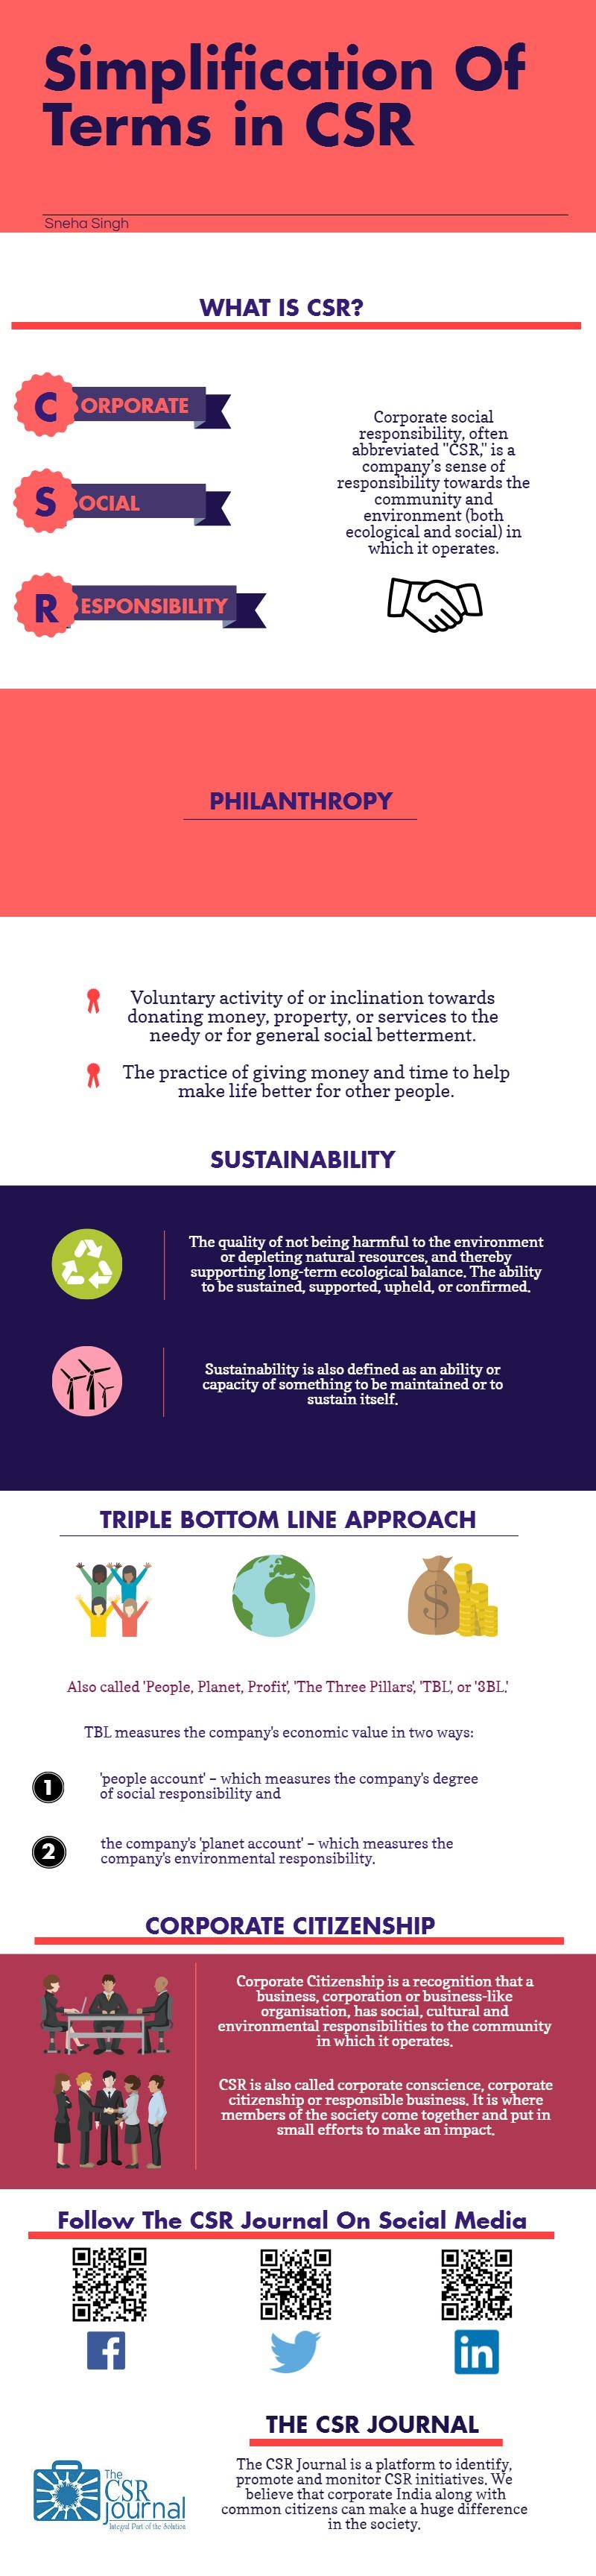 simplification-of-terms-in-csr